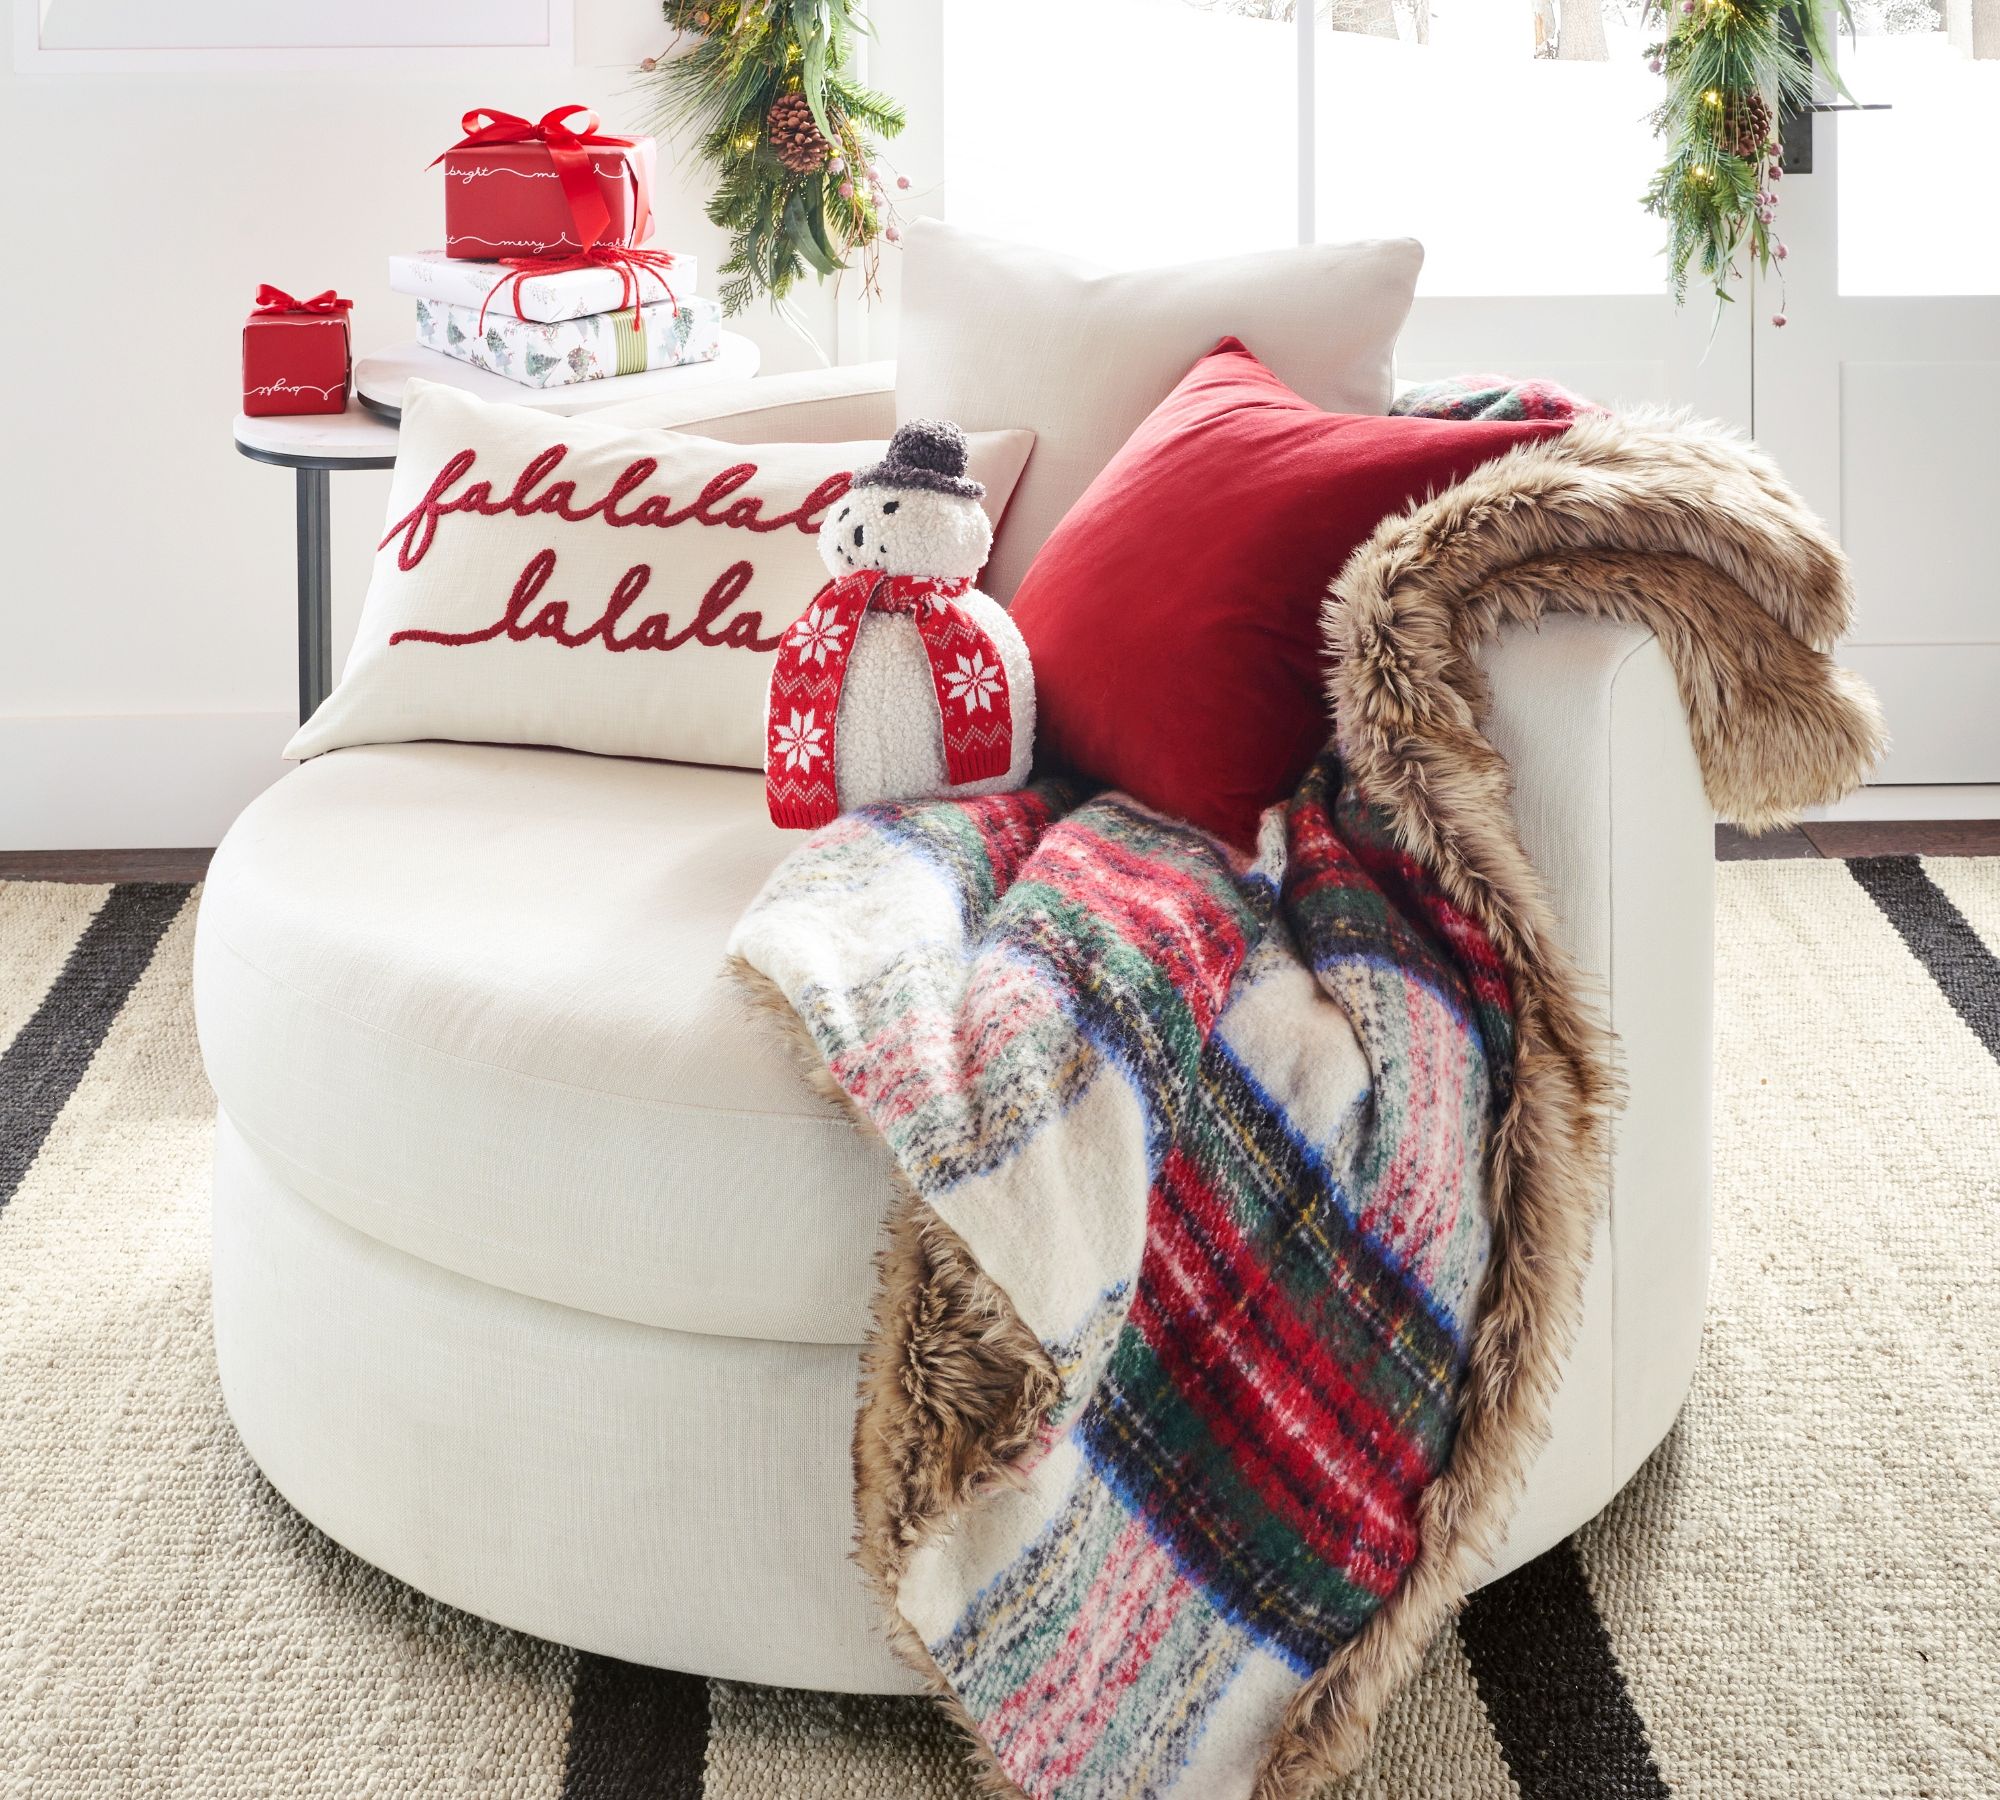 holiday decorating with plaid blanket